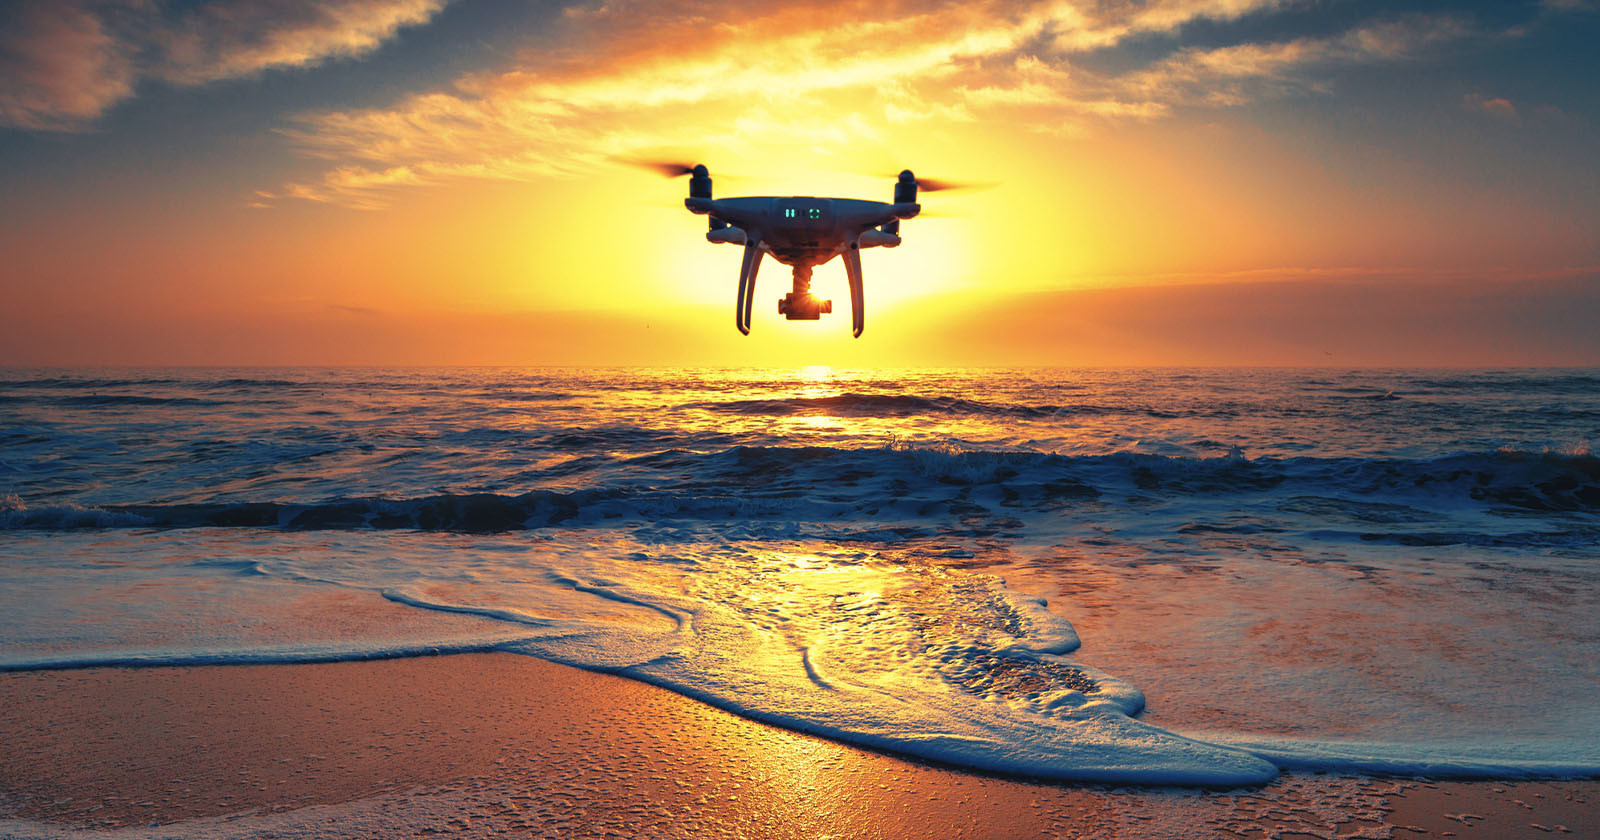 Surf Photographer Questions Beach Drones: They Make a Lot of Noise